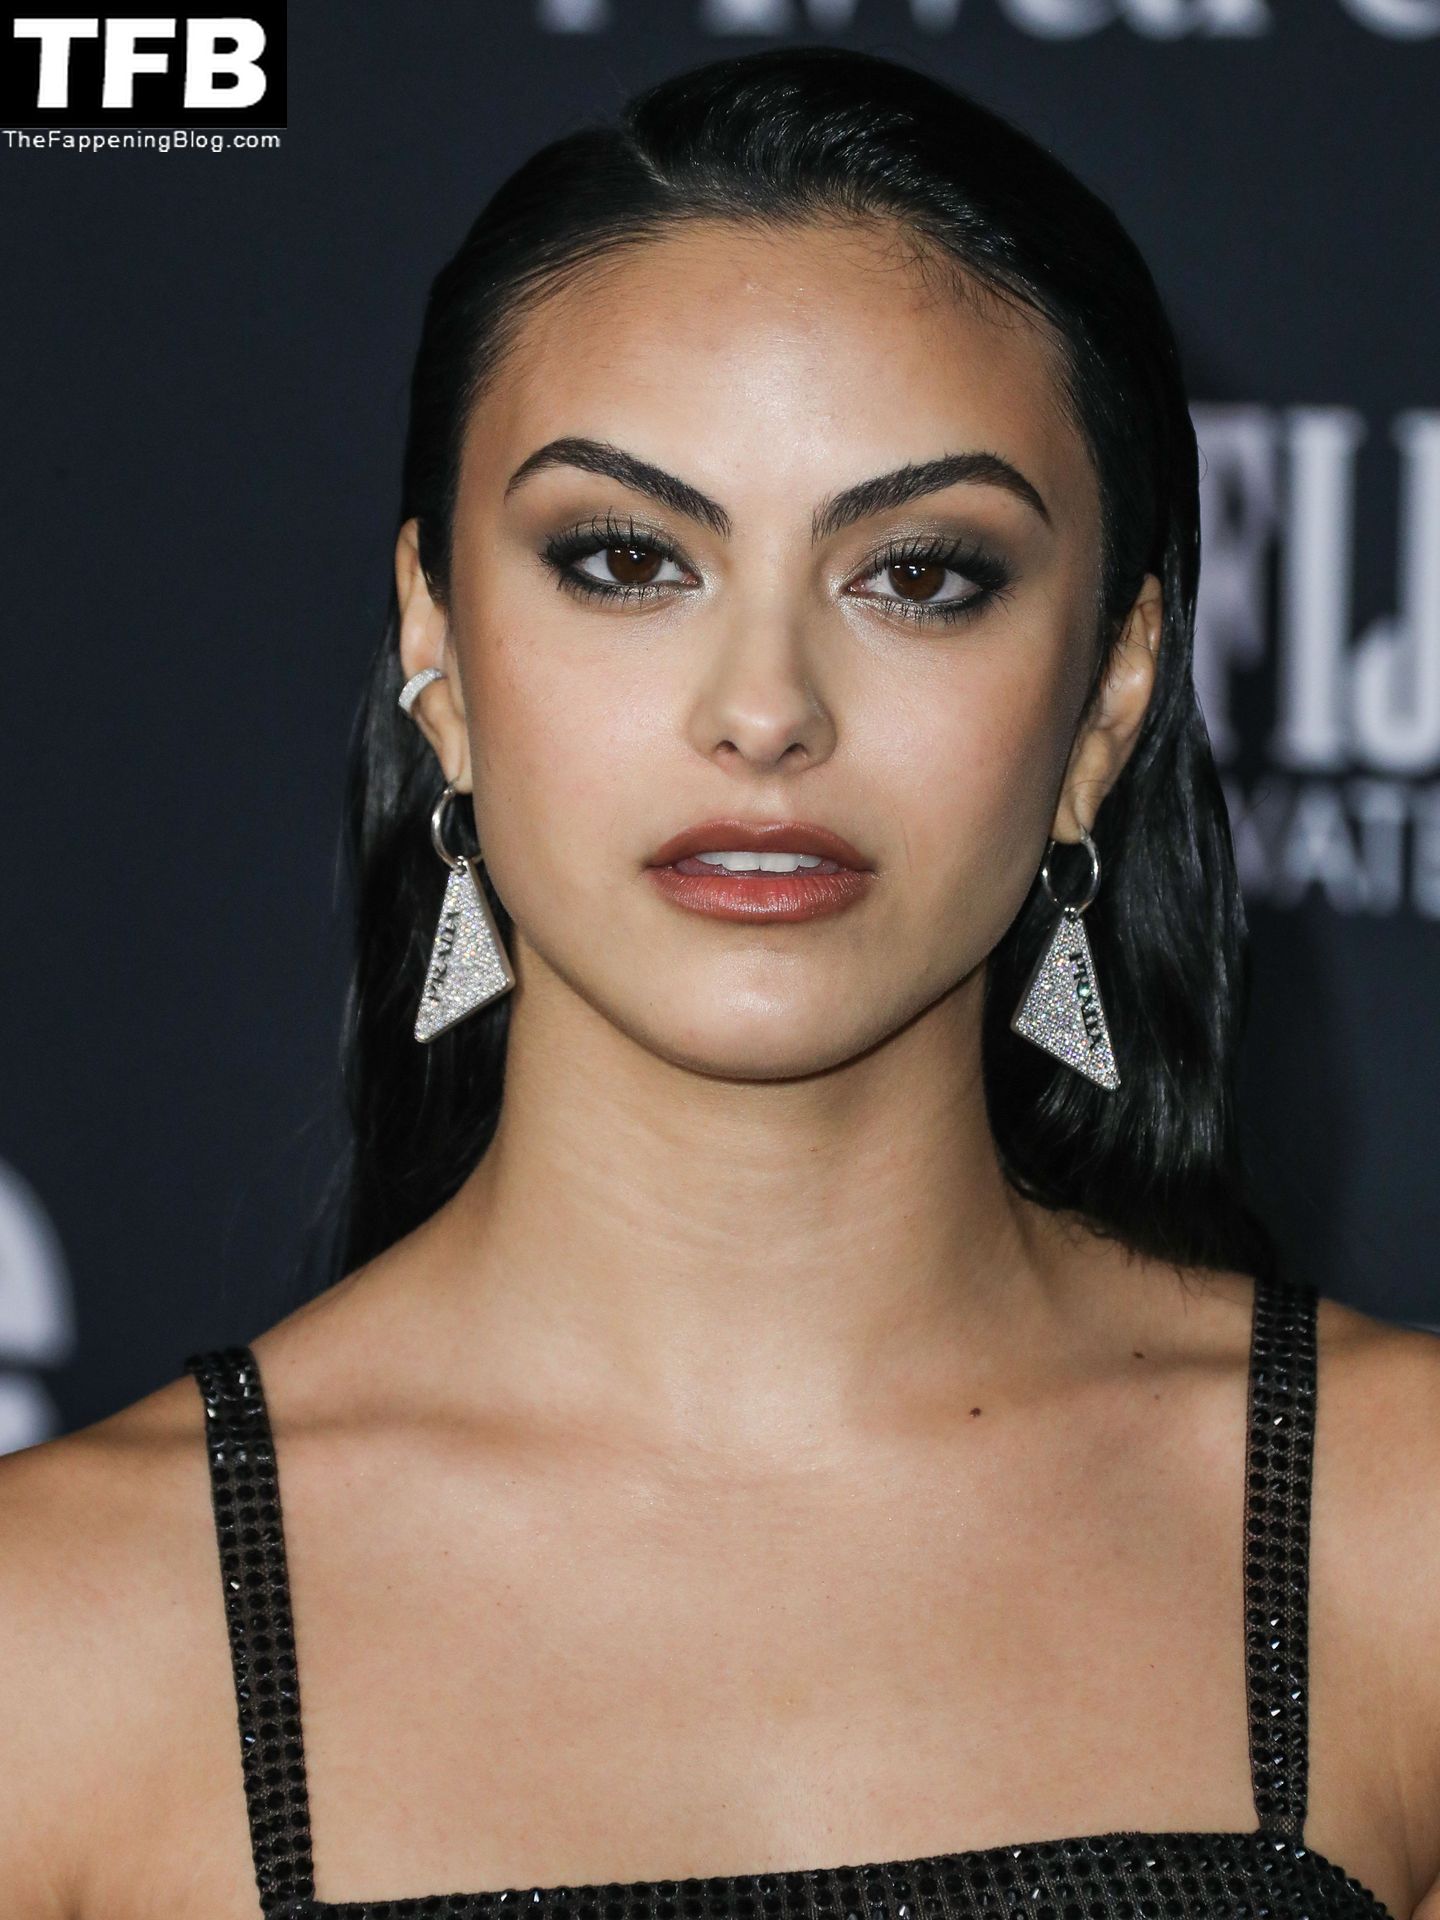 Camila-Mendes-See-Through-Tits-The-Fappening-Blog-1.jpg